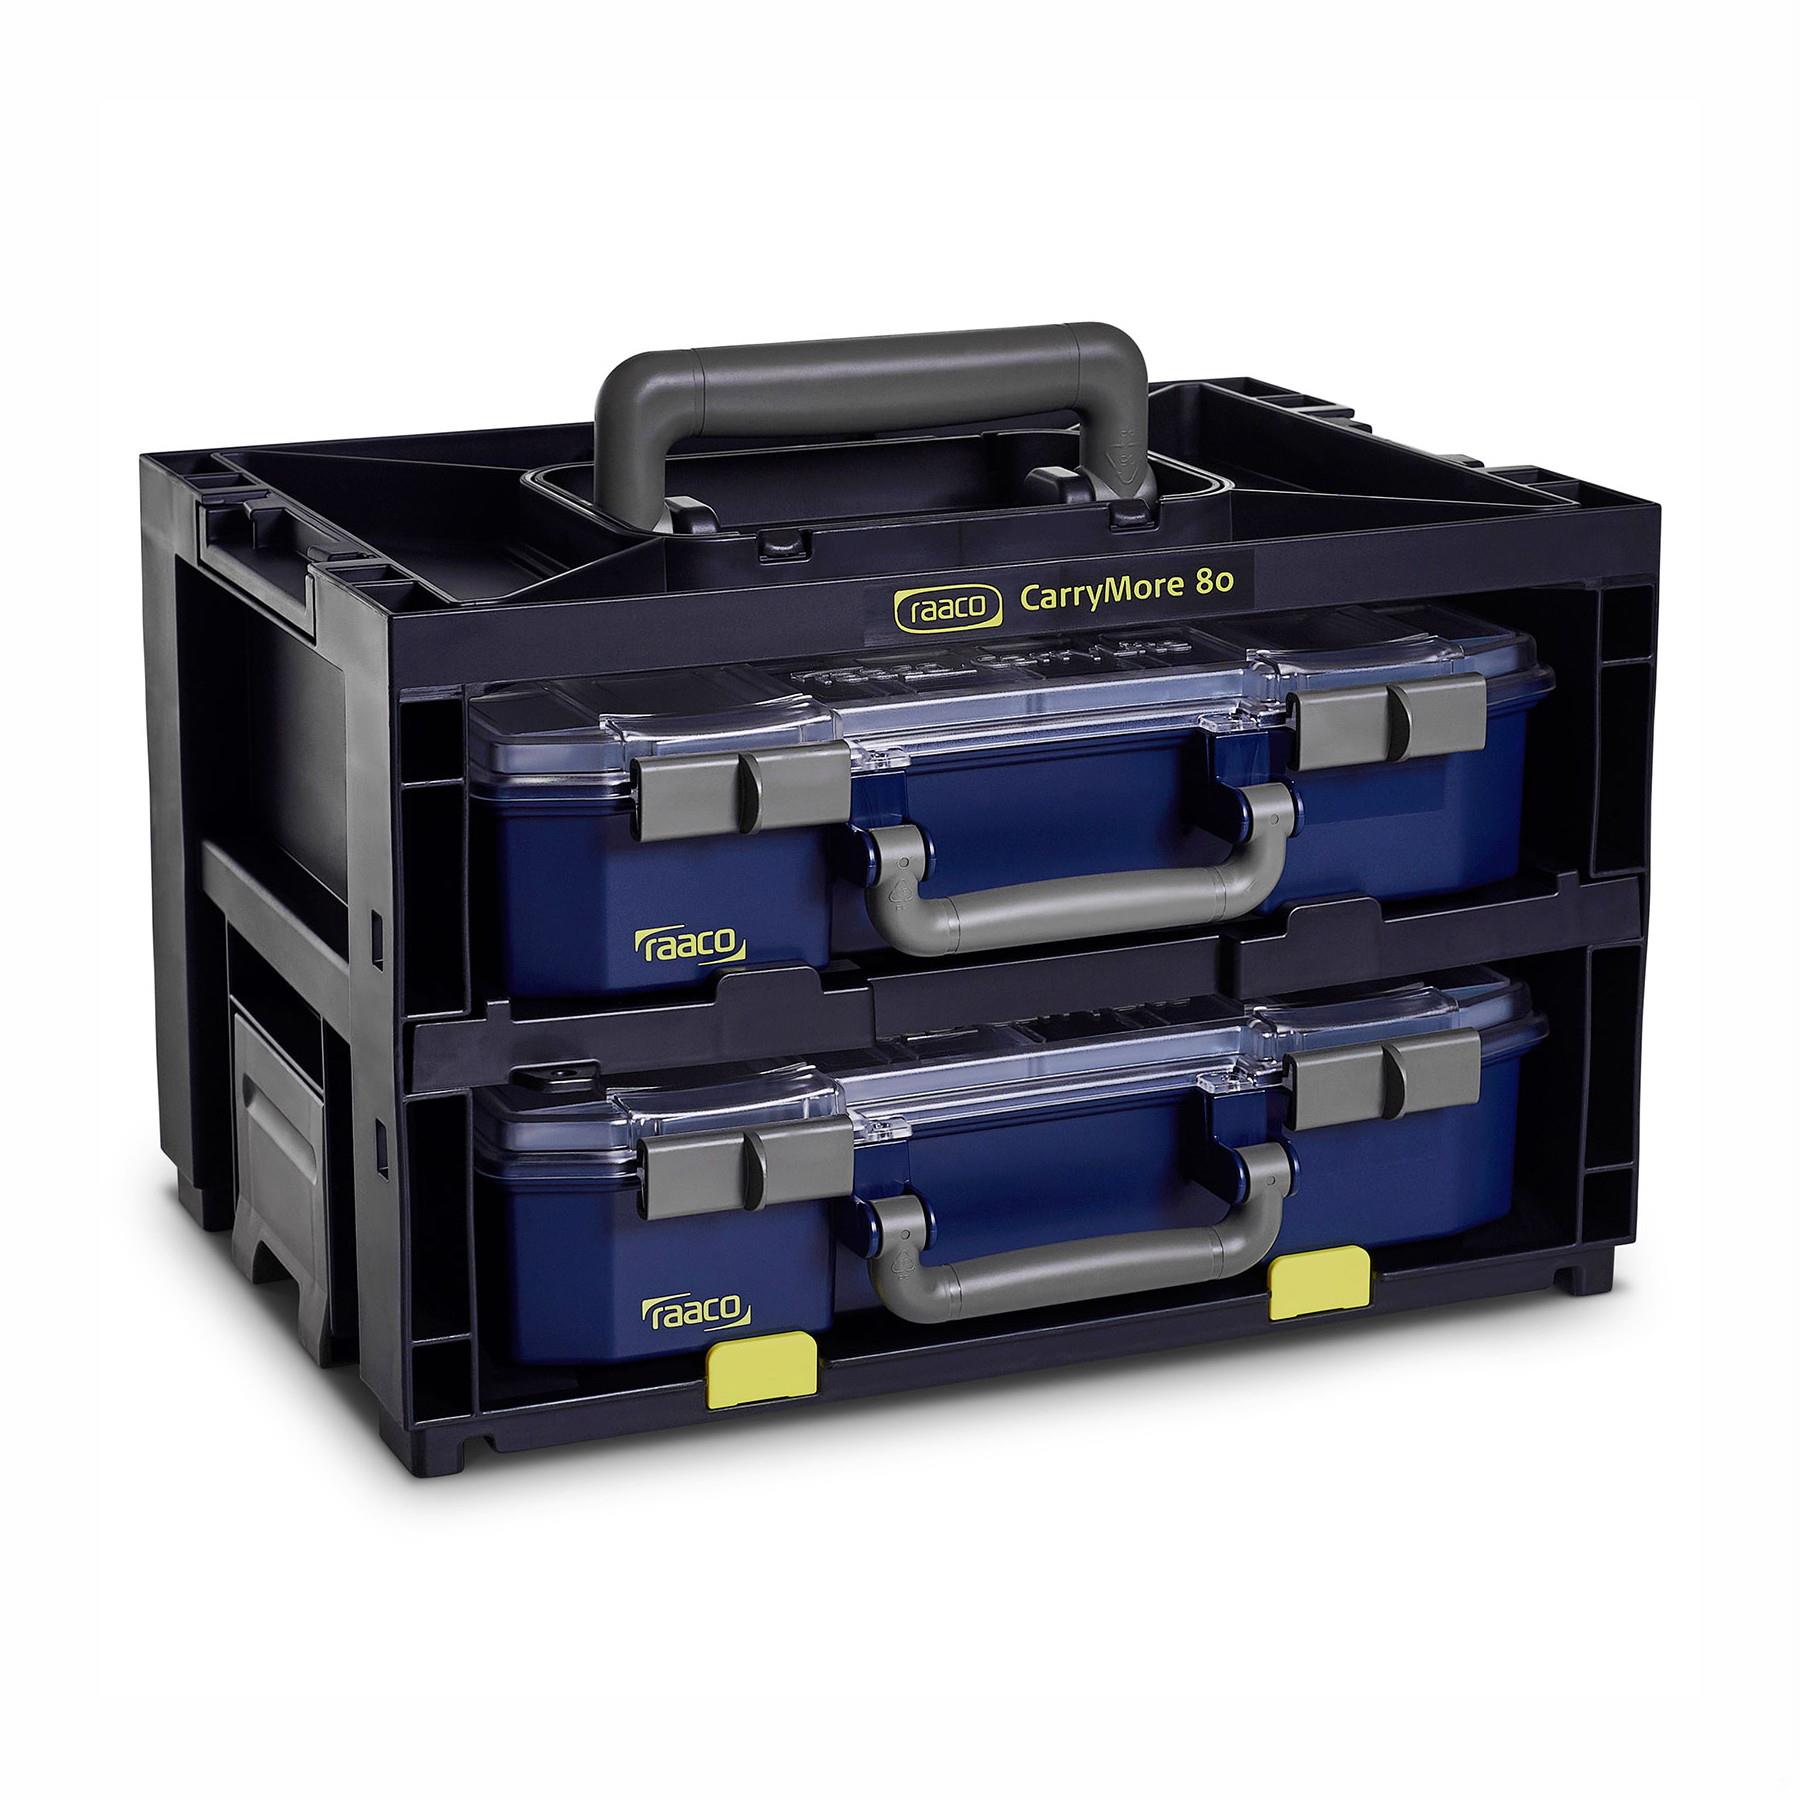 Raaco CarryMore 80 x 2 Storage System